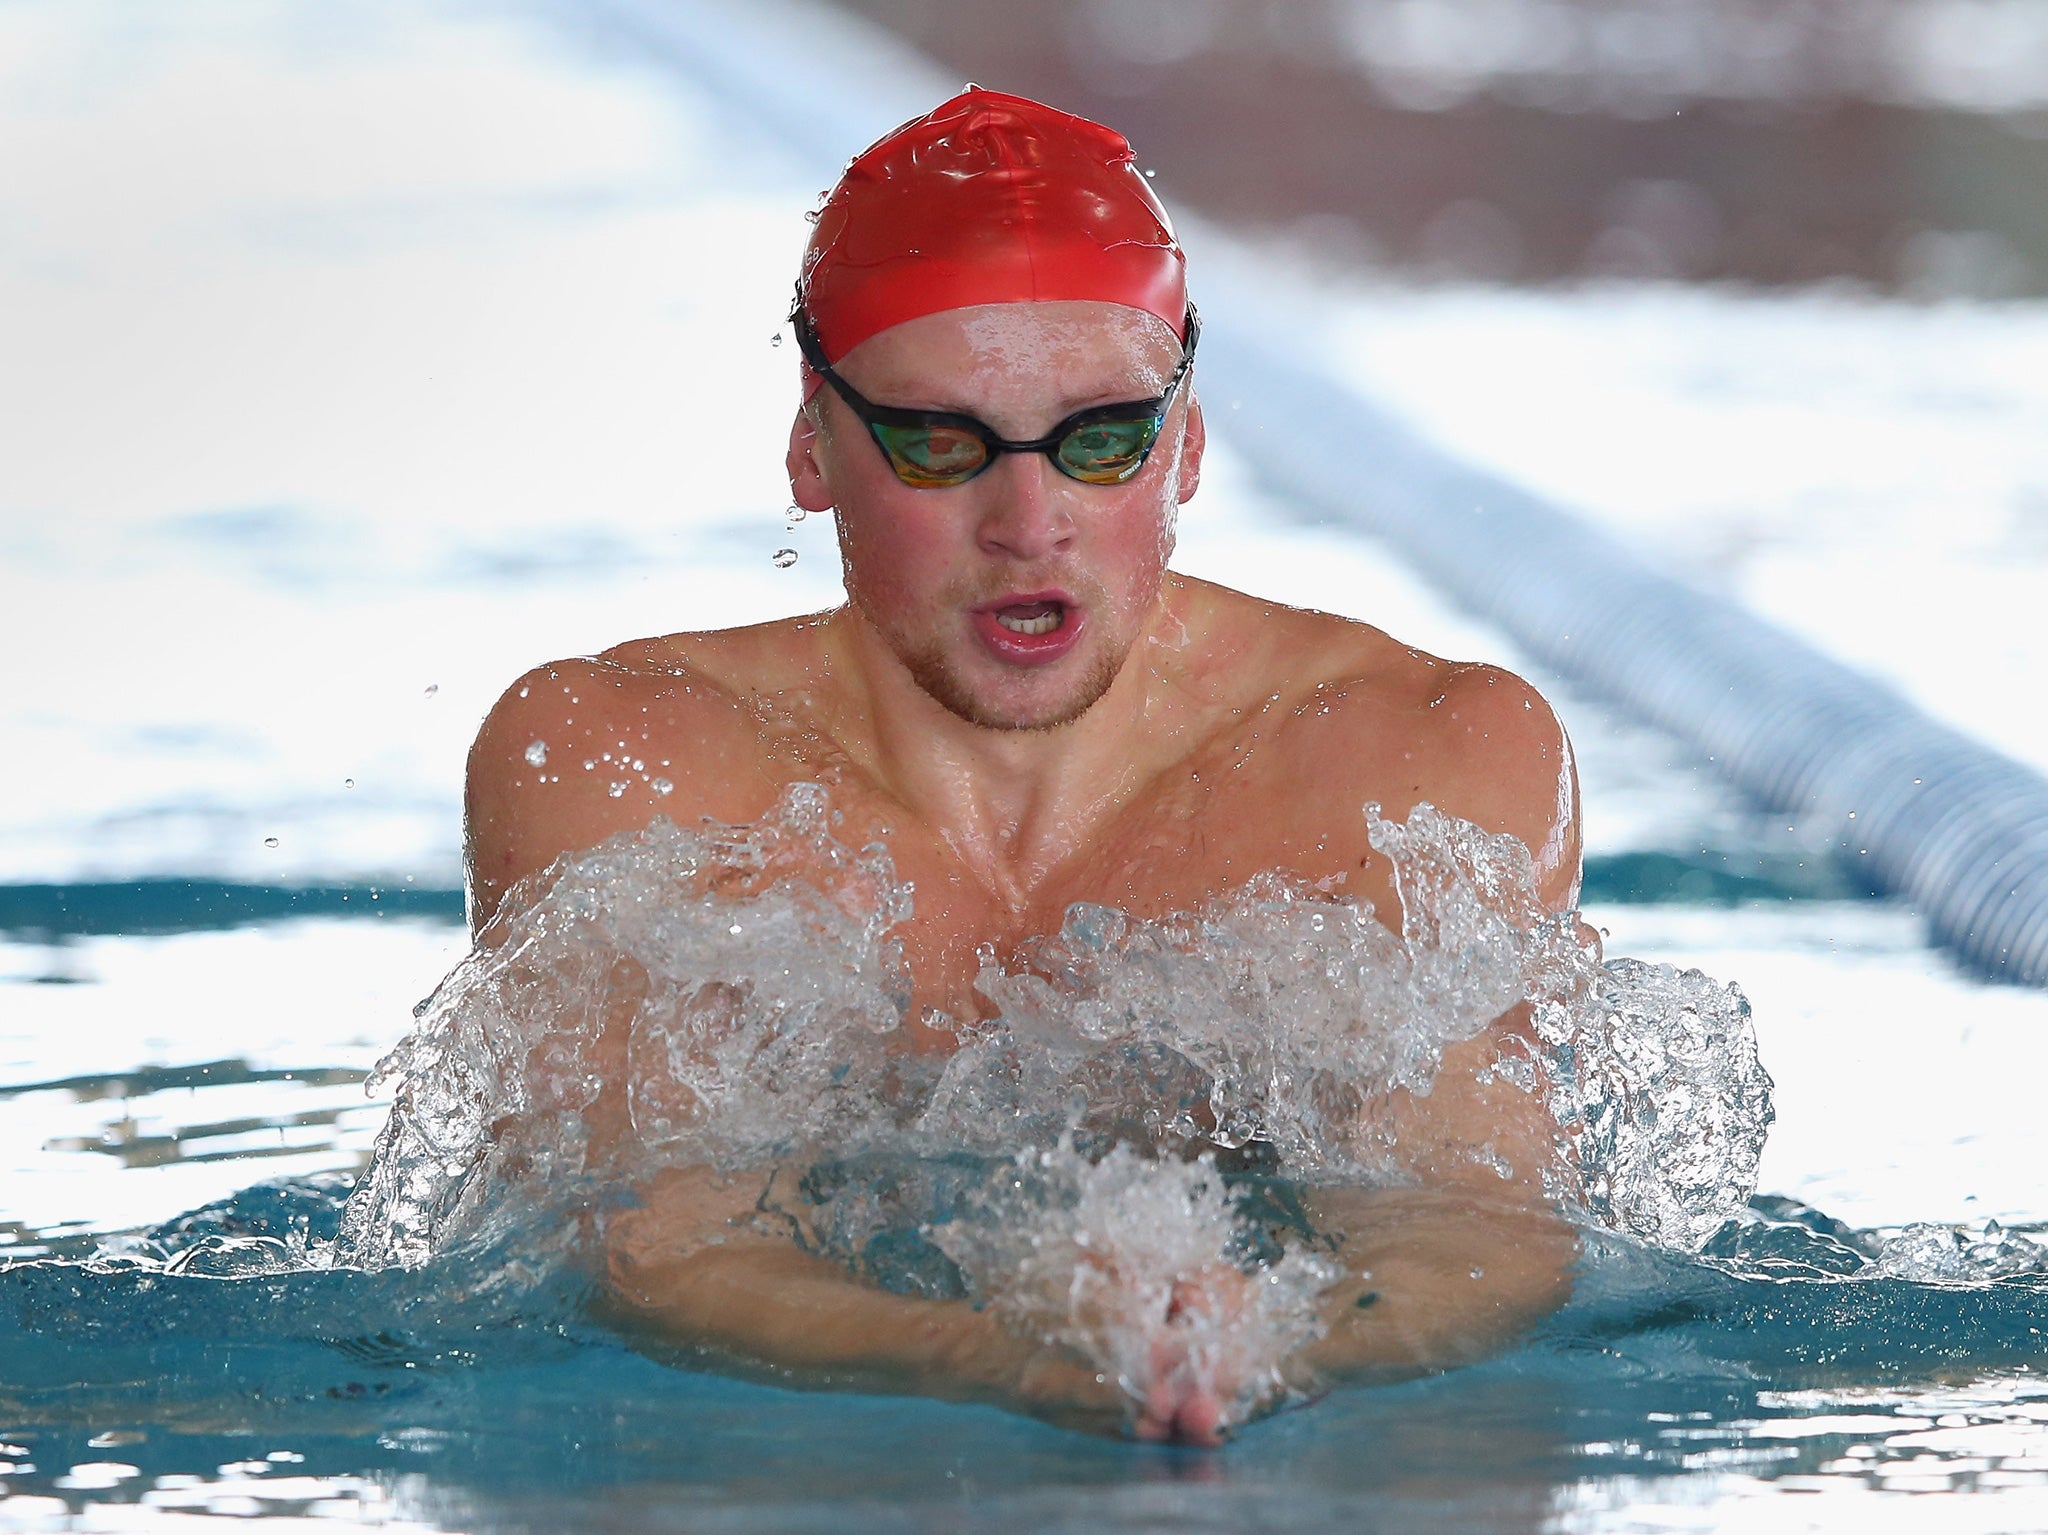 Peaty is Team GB's great hope for gold in the pool